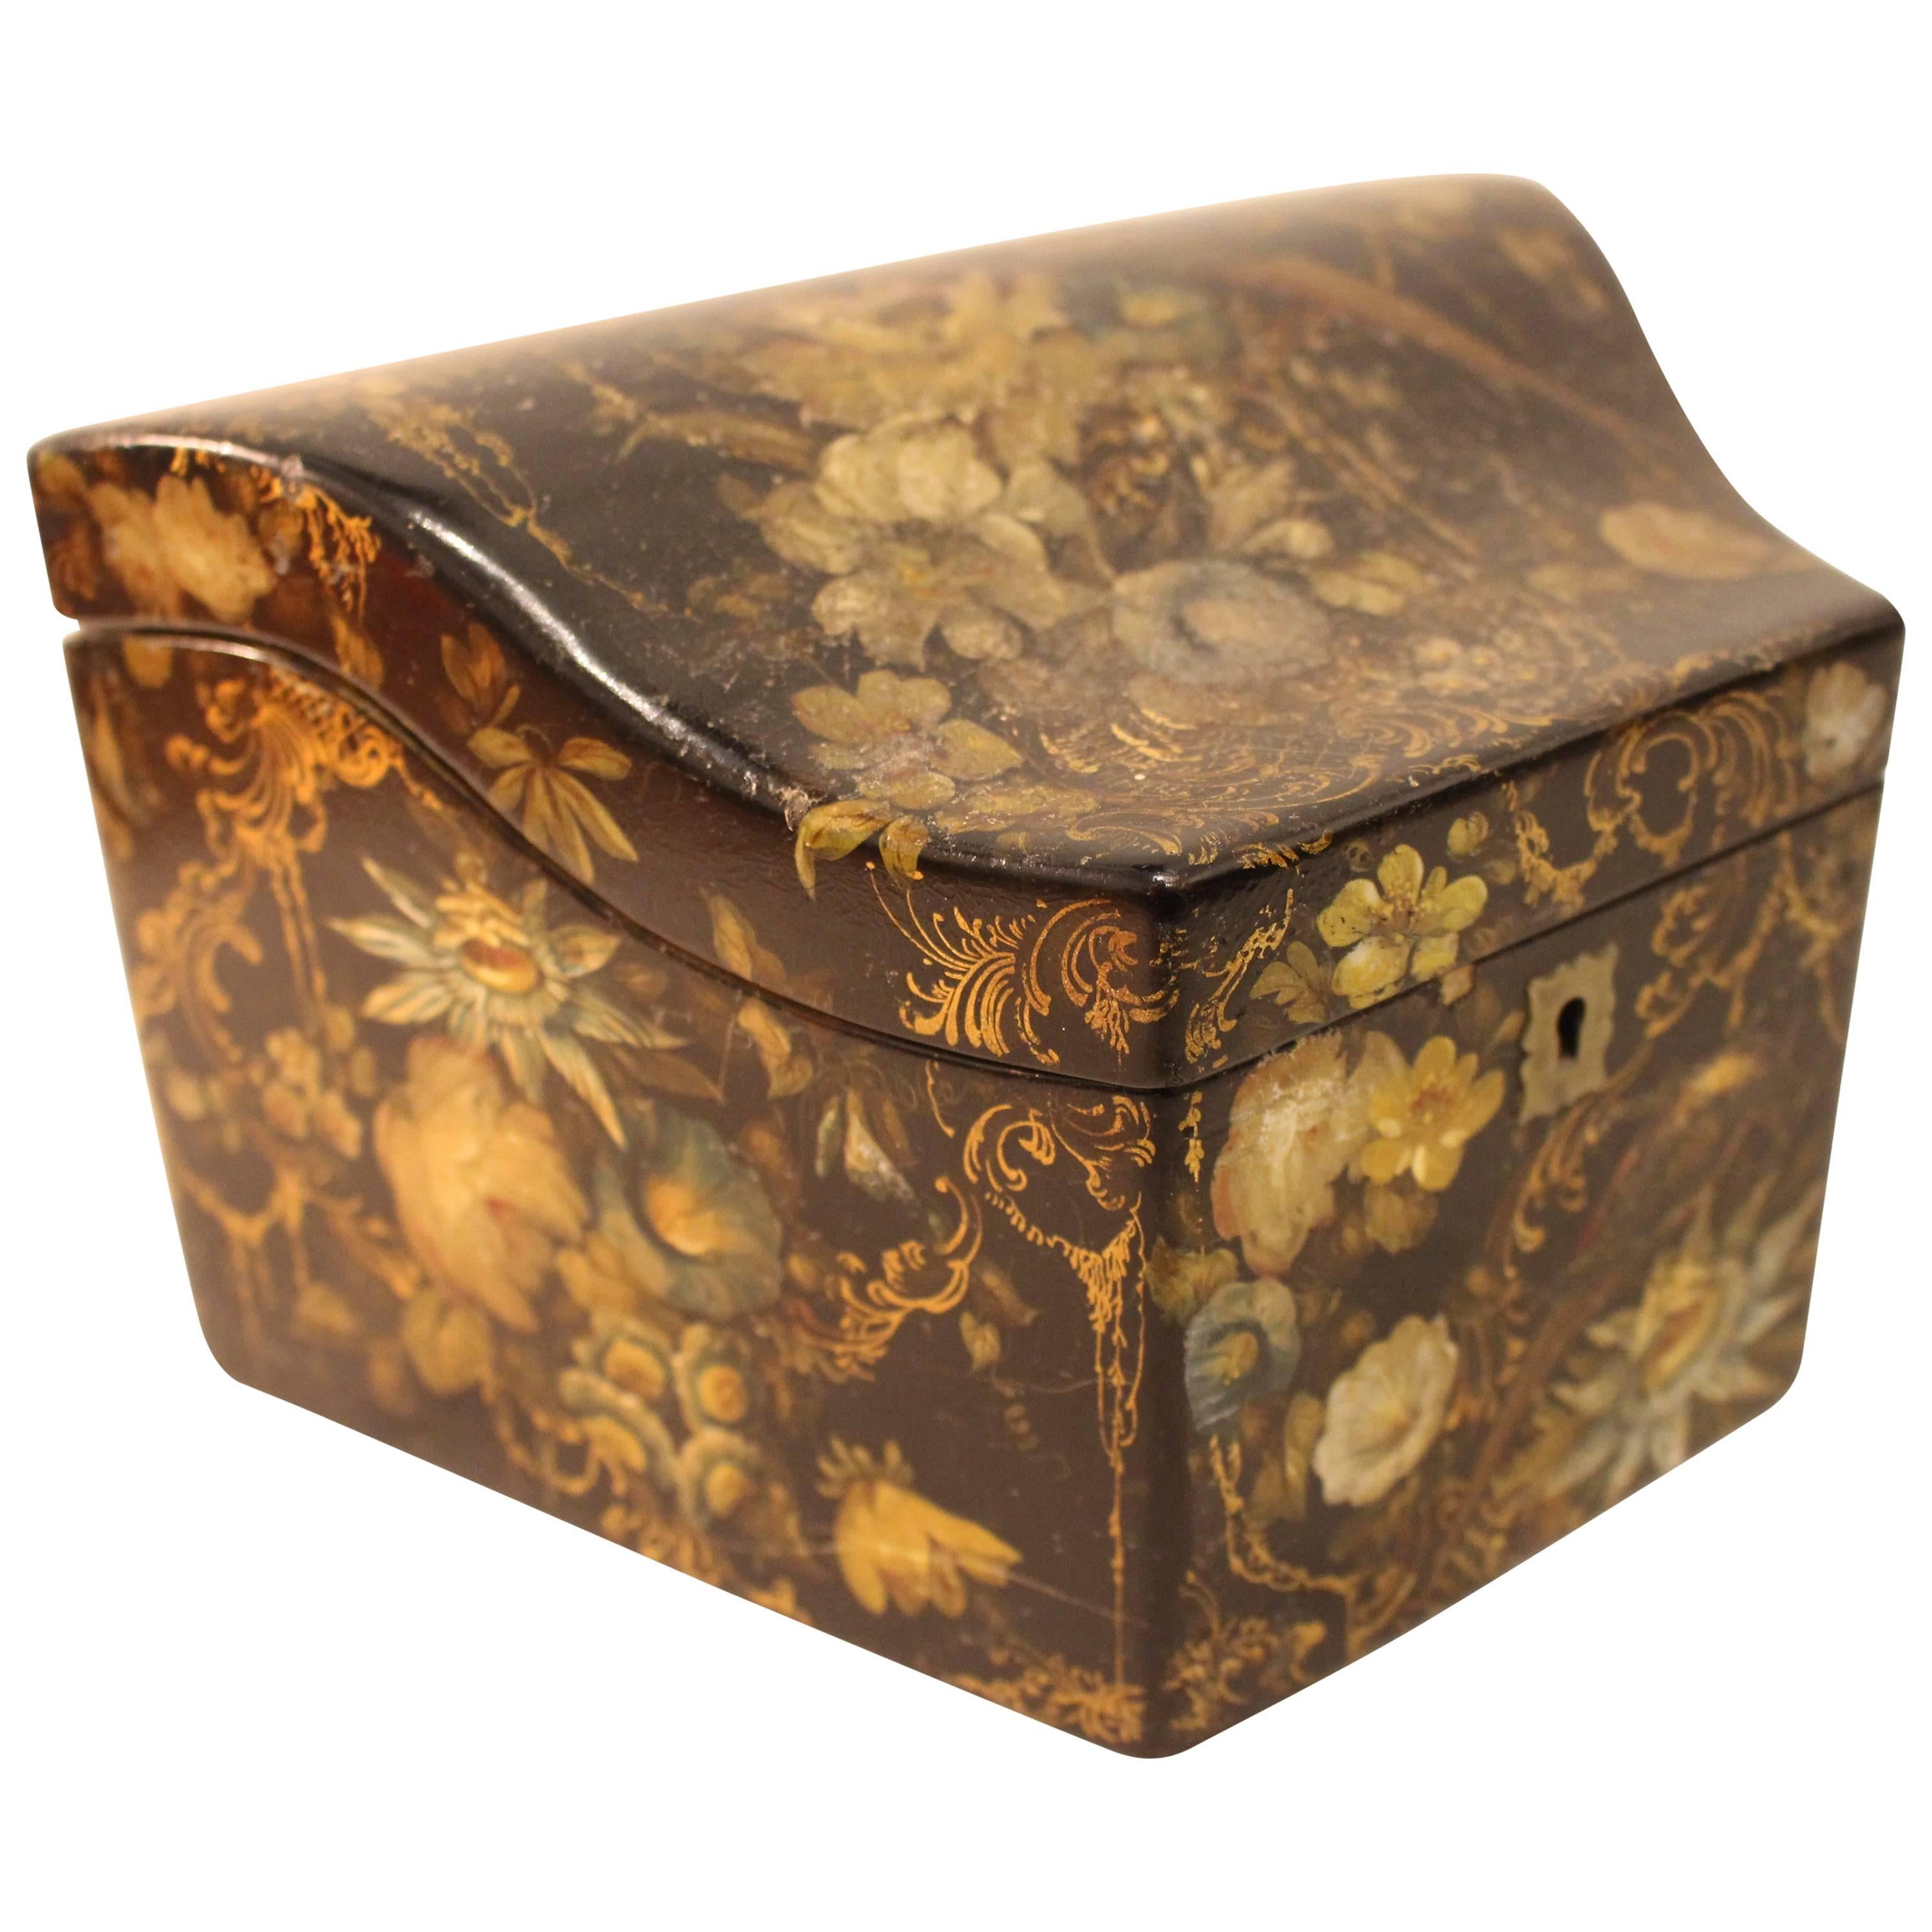 Victorian Papier-Mache Stationary Box With Painted, Gilded Birds and Flowers